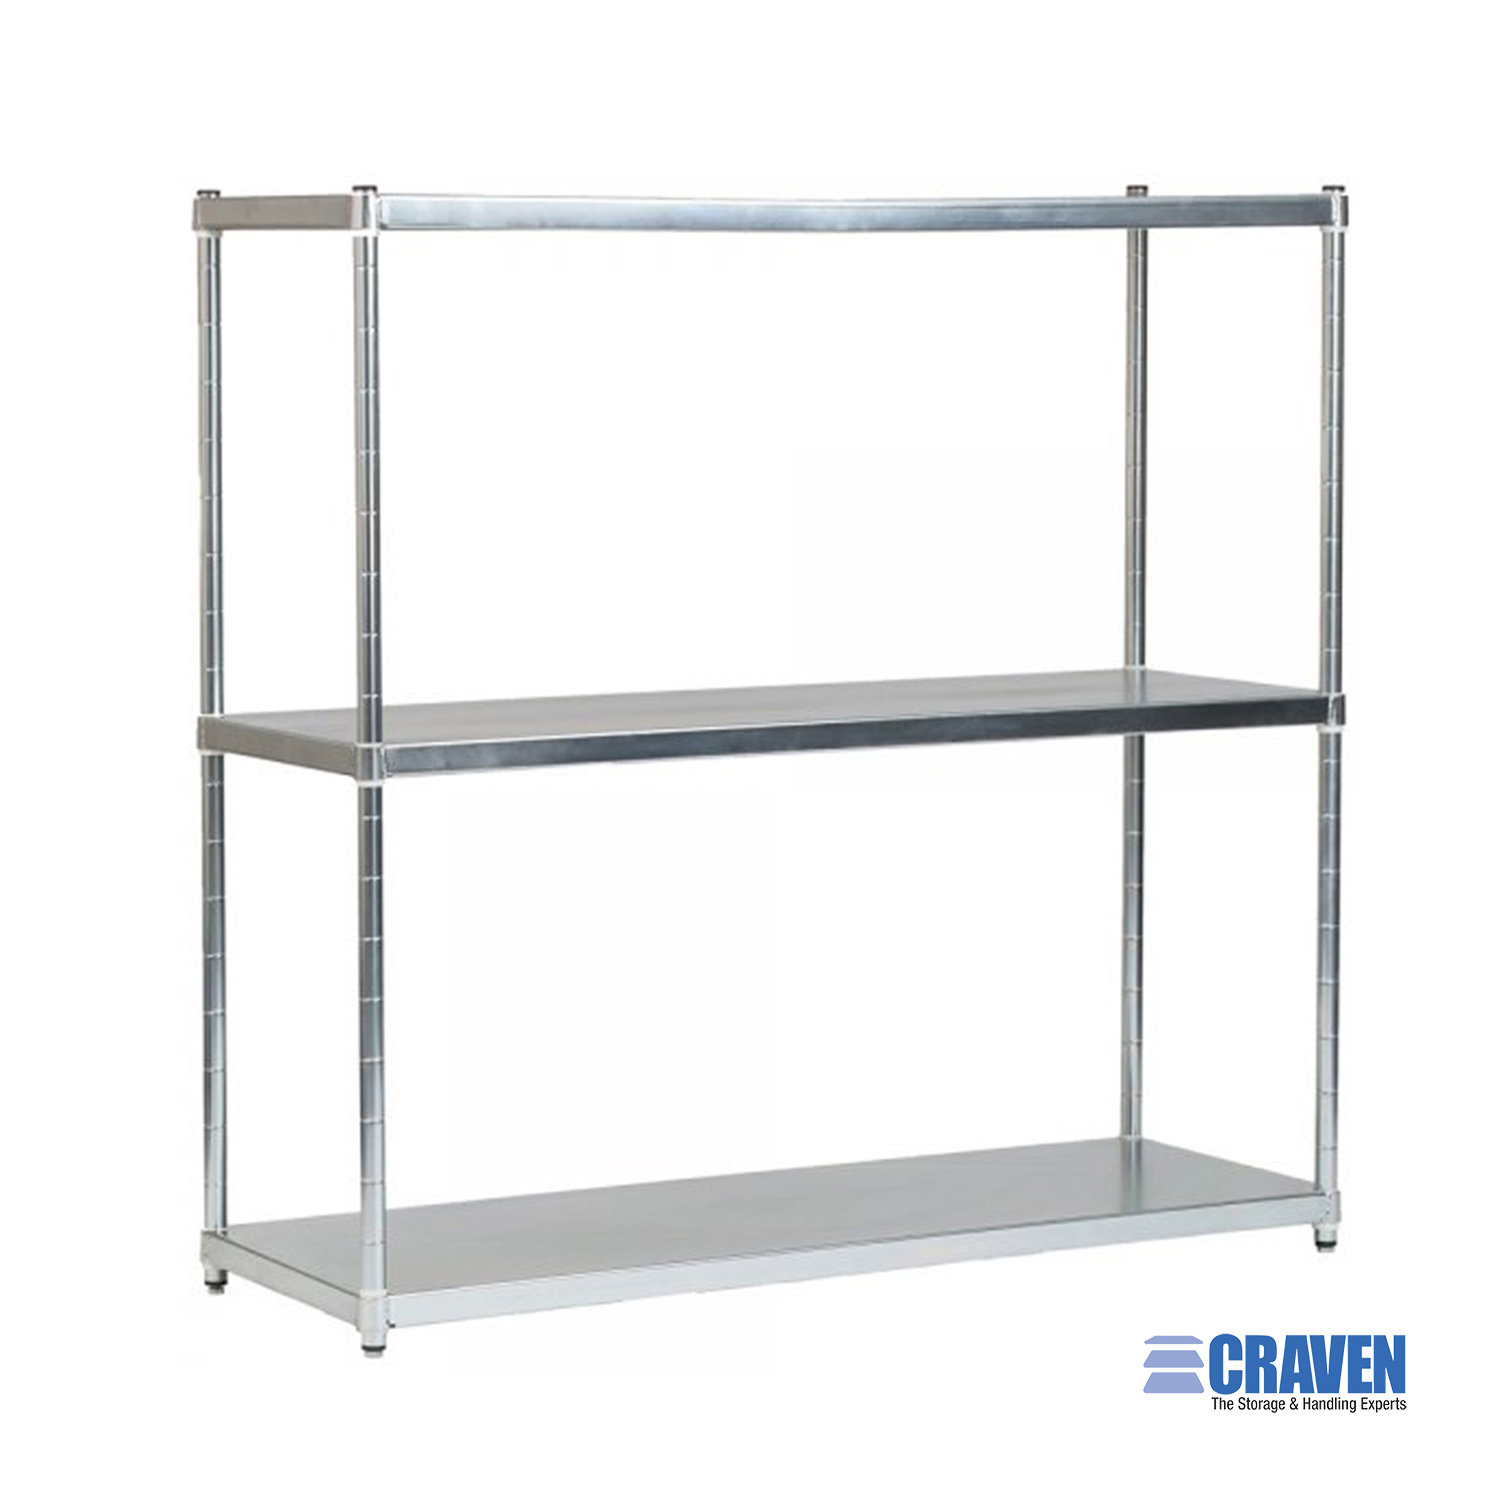 Stainless Steel Solid Shelving Craven, Heavy Duty Steel Shelving Sam’s Club